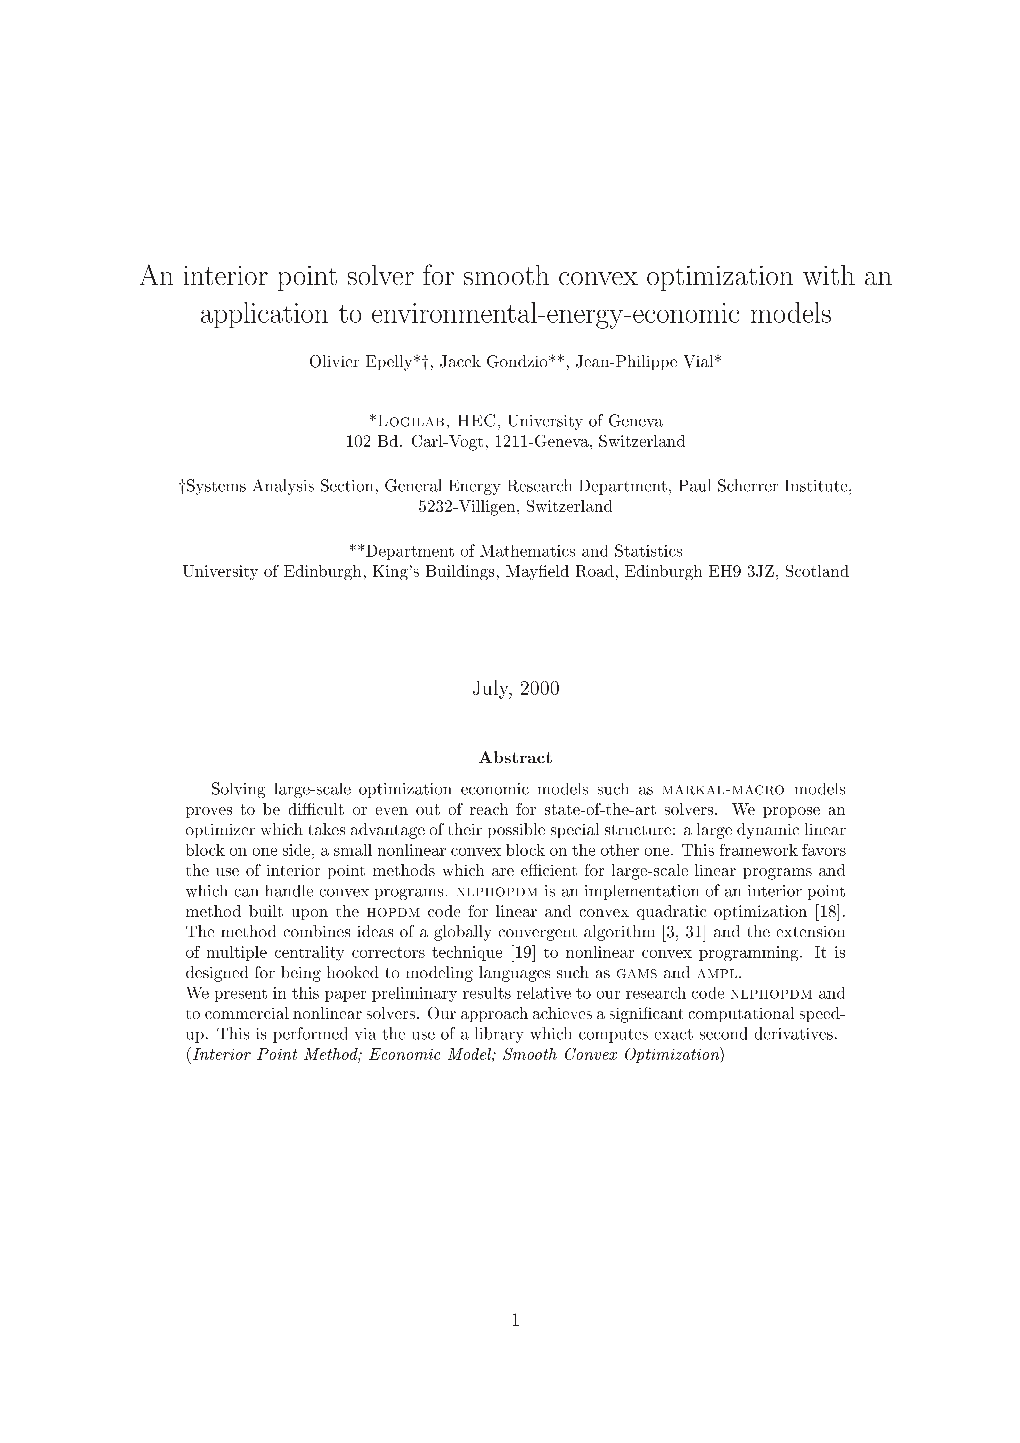 An Interior Point Solver for Smooth Convex Optimization with An